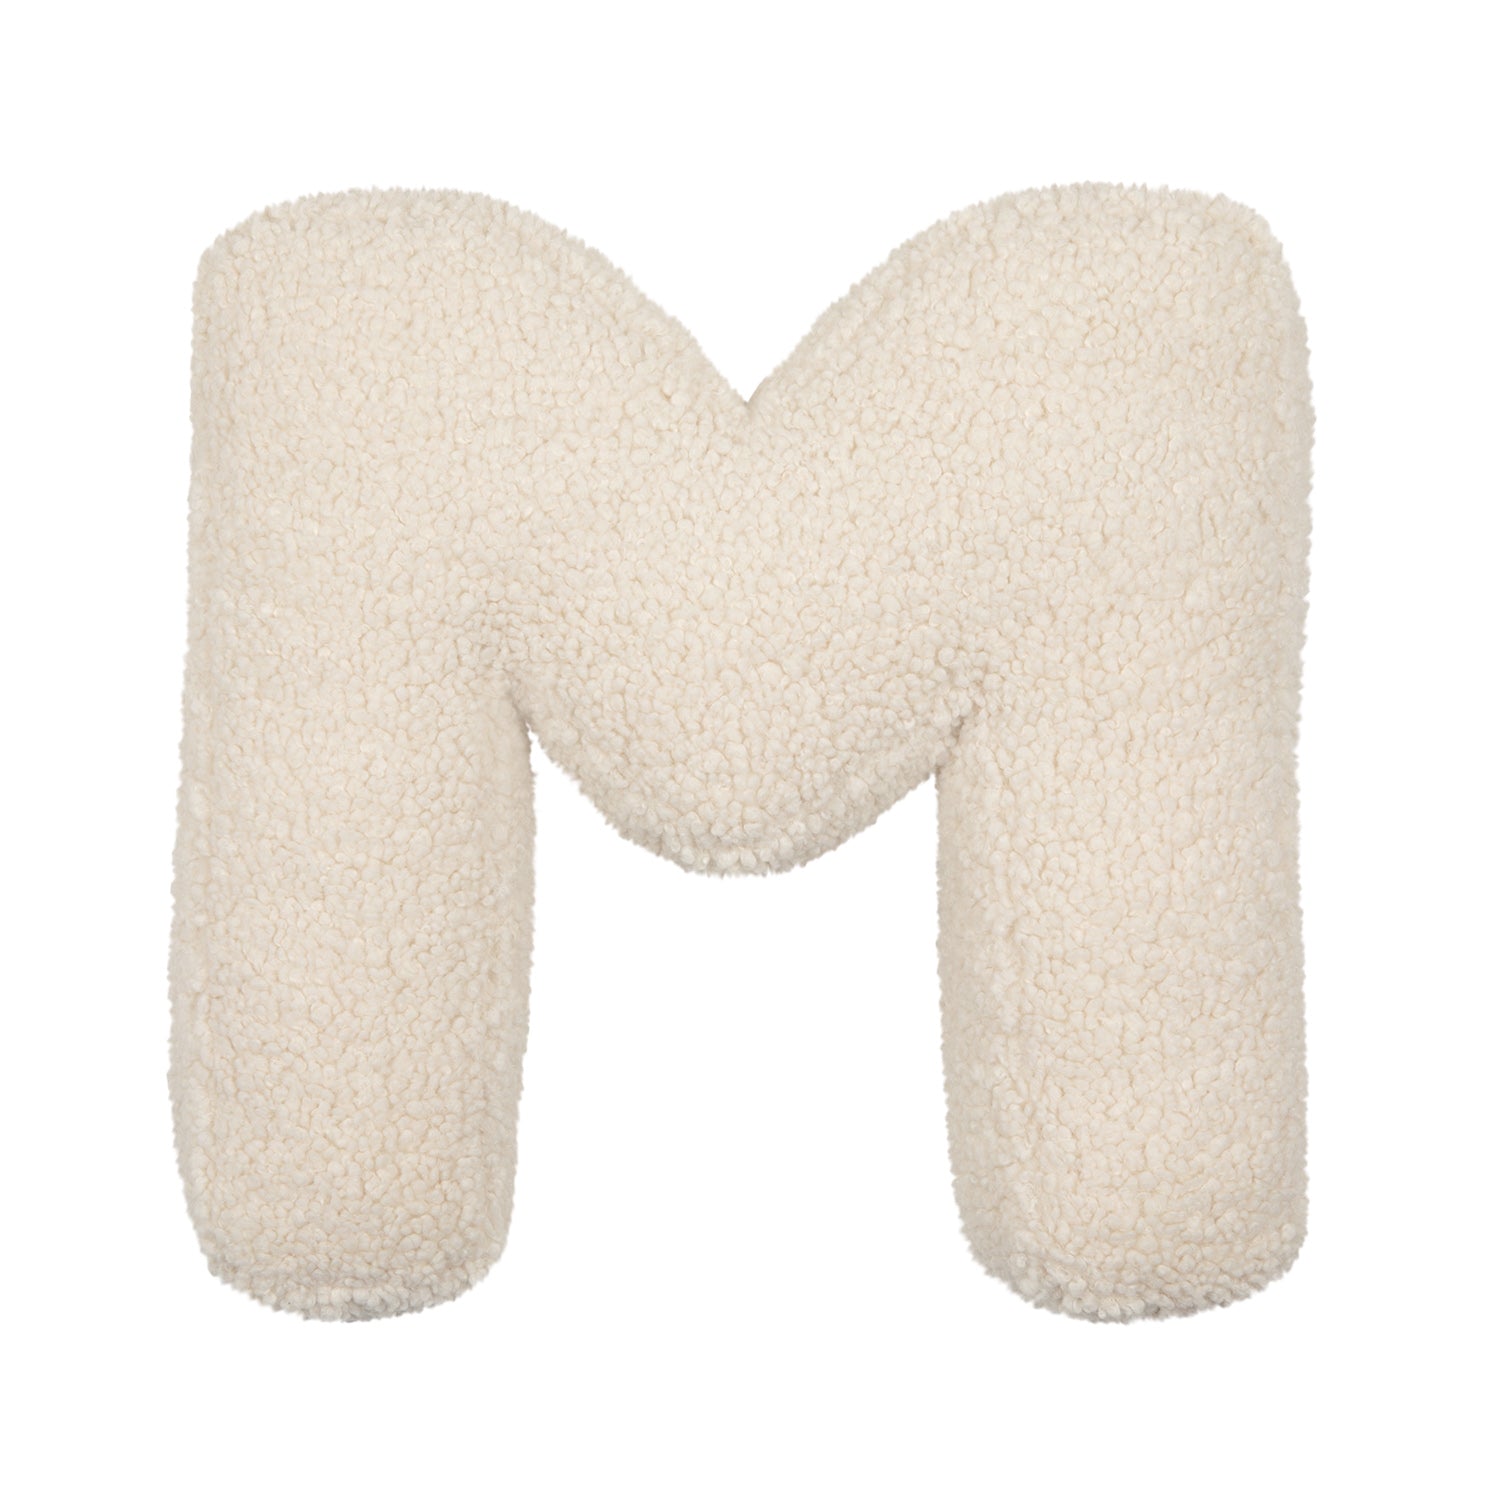 Boucle letter cushion M teddy pillow by bettys home on white background 